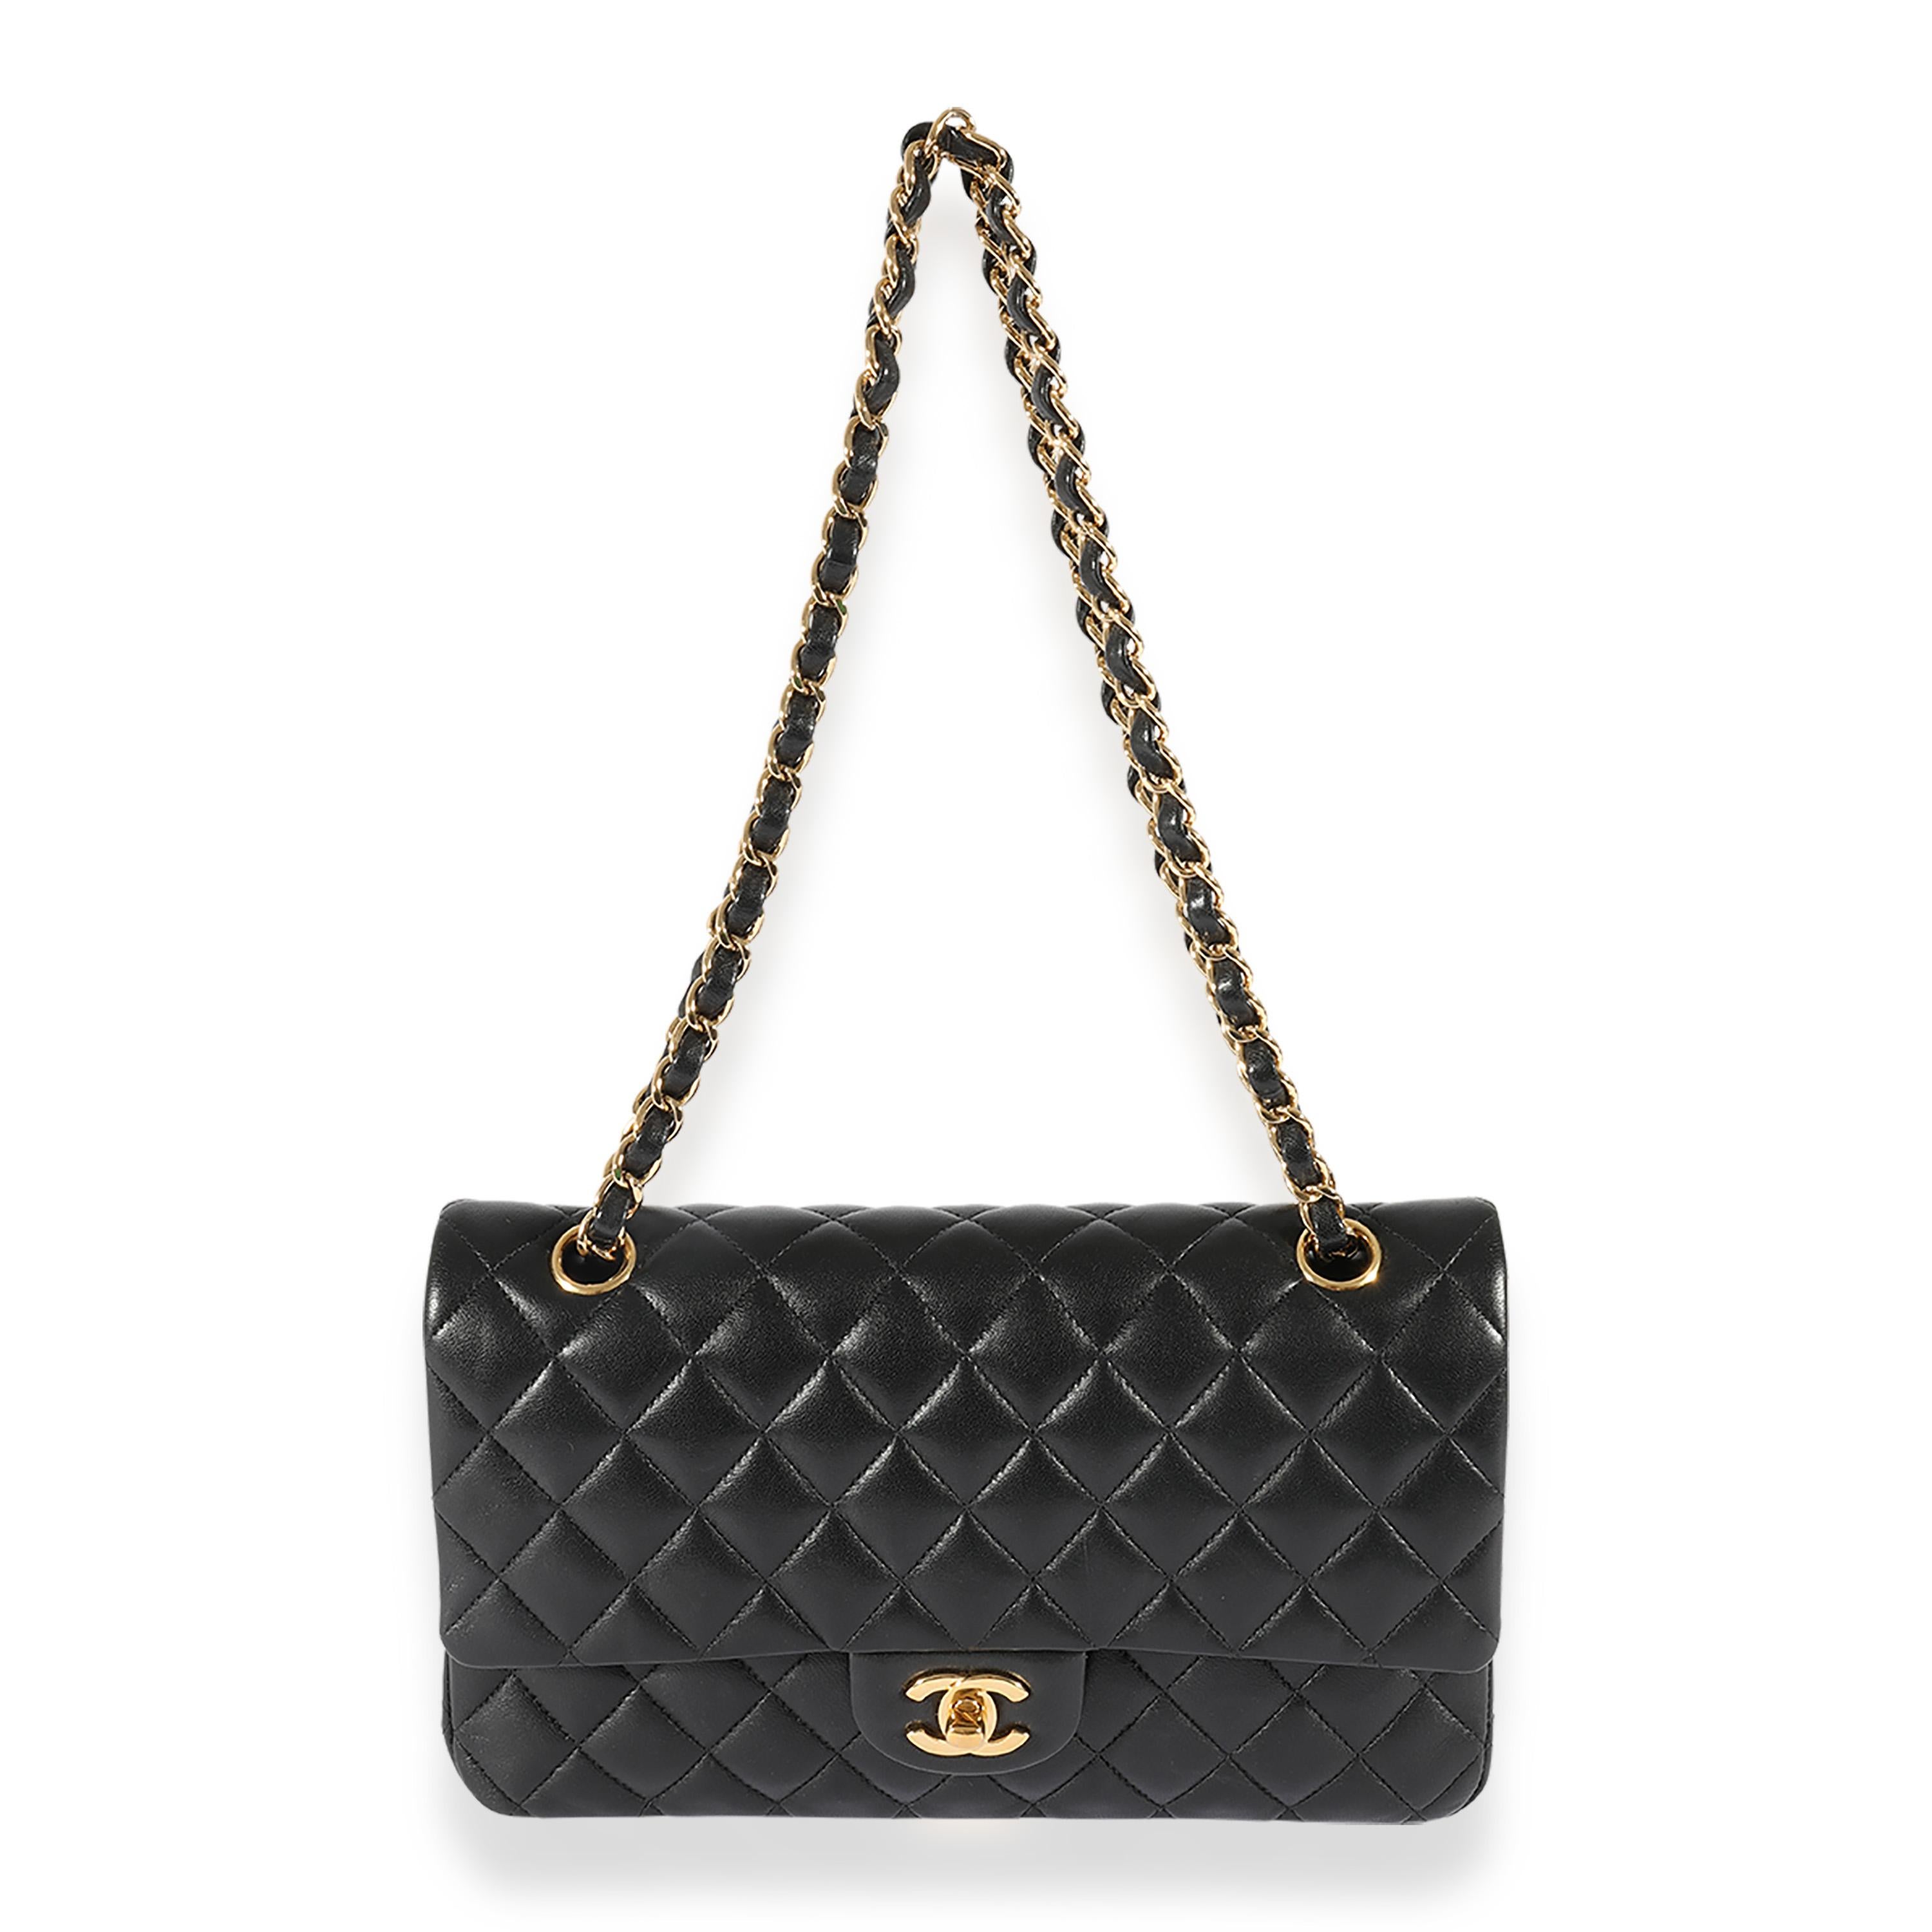 Listing Title: Chanel Black Quilted Lambskin Medium Classic Double Flap Bag
SKU: 124847
Condition: Pre-owned 
Handbag Condition: Very Good
Condition Comments: Very Good Condition. Scuffing to corners and exterior. Scratching to hardware. Scuffing